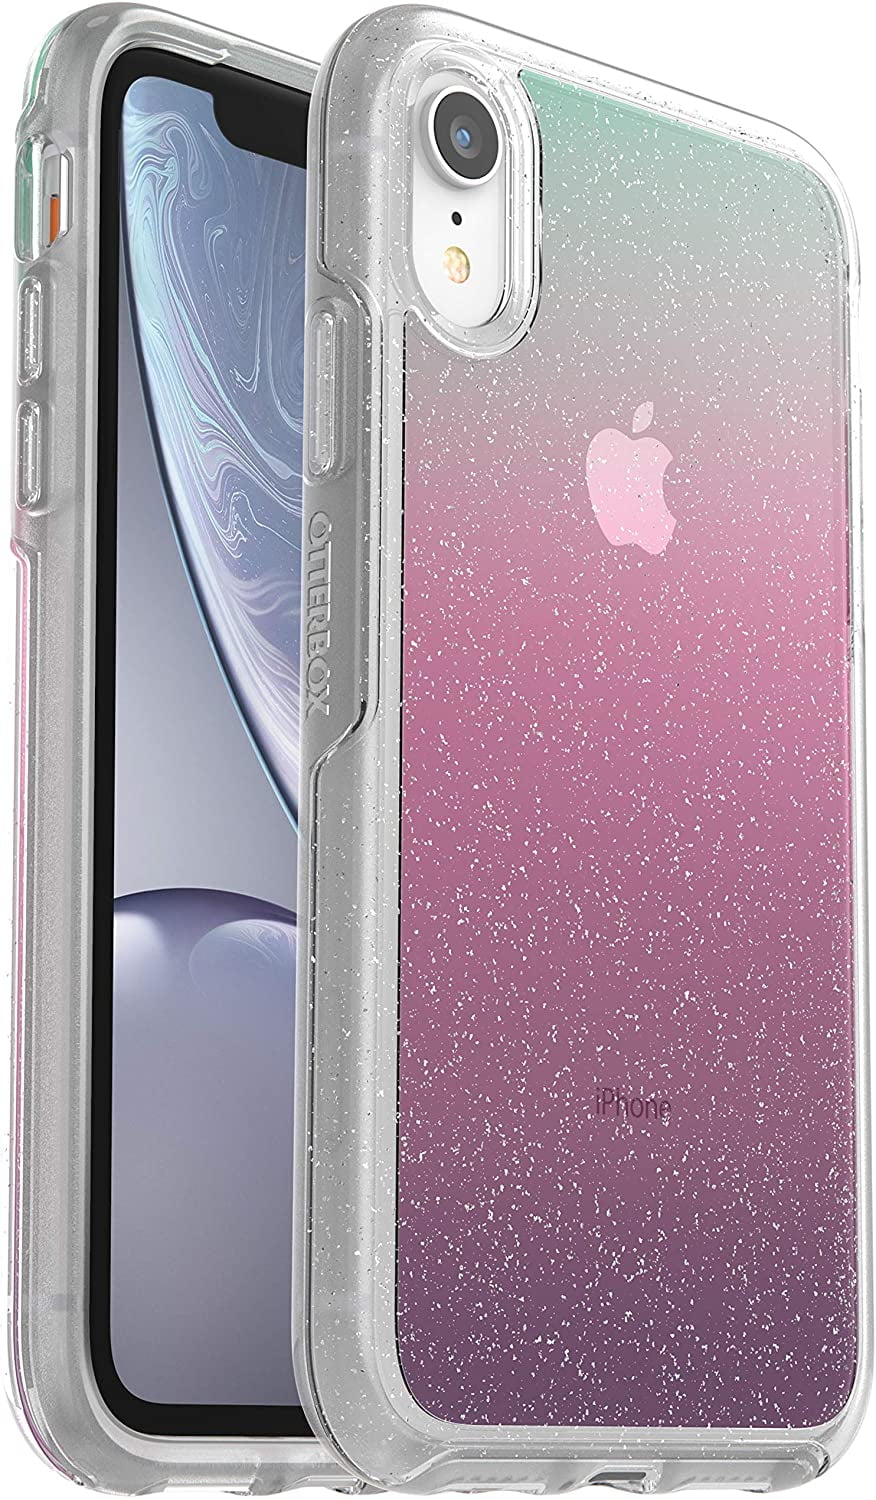 OtterBox Symmetry Clear Series Case for iPhone XR, Gradient Energy